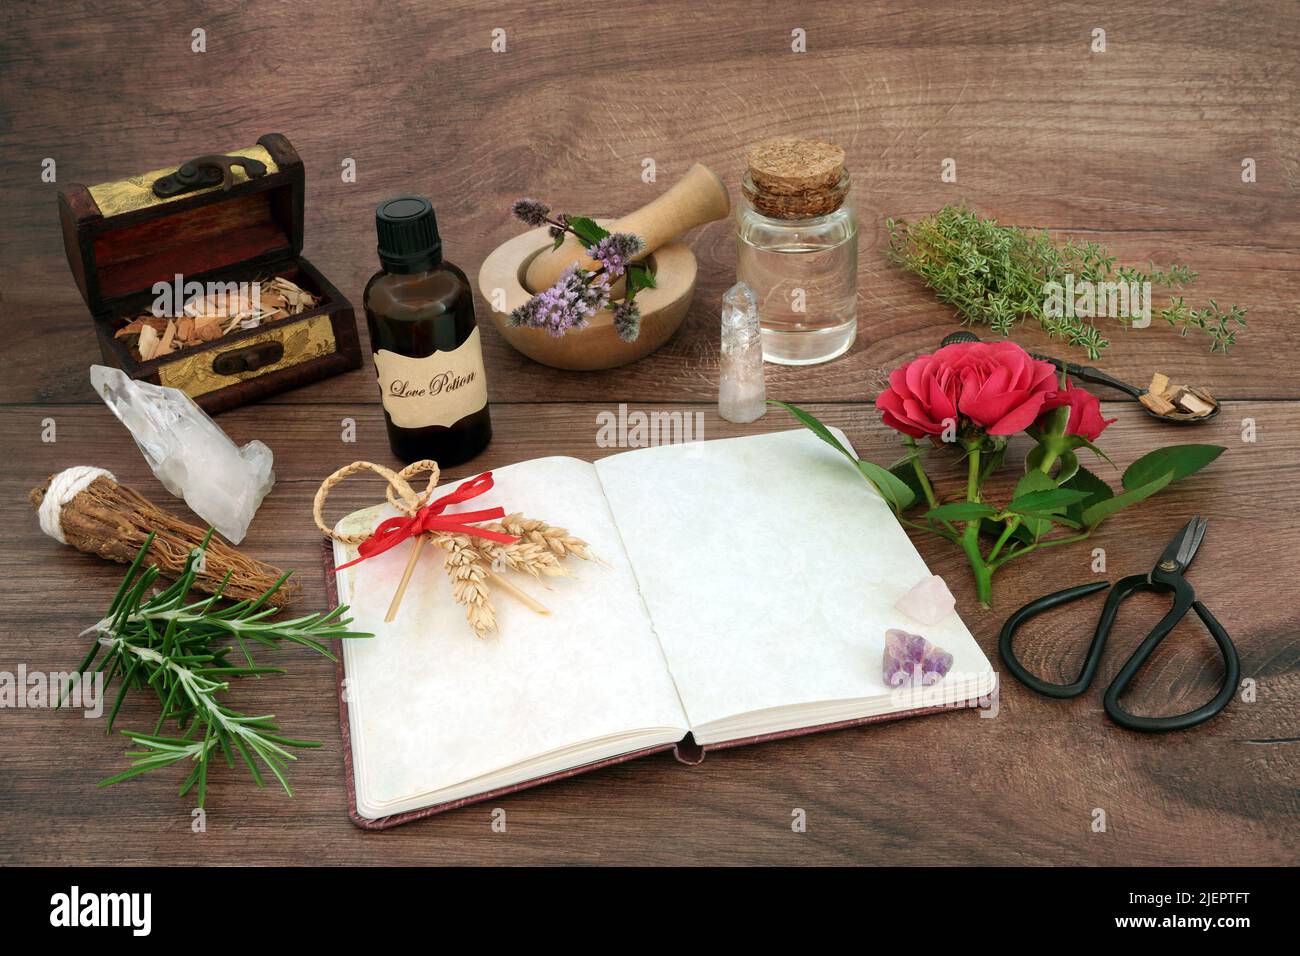 Love potion preparation with recipe notebook, corn dolly for fertility occult ritual, rose flower, herbs, crystals, oil and honey for magic spells. Stock Photo